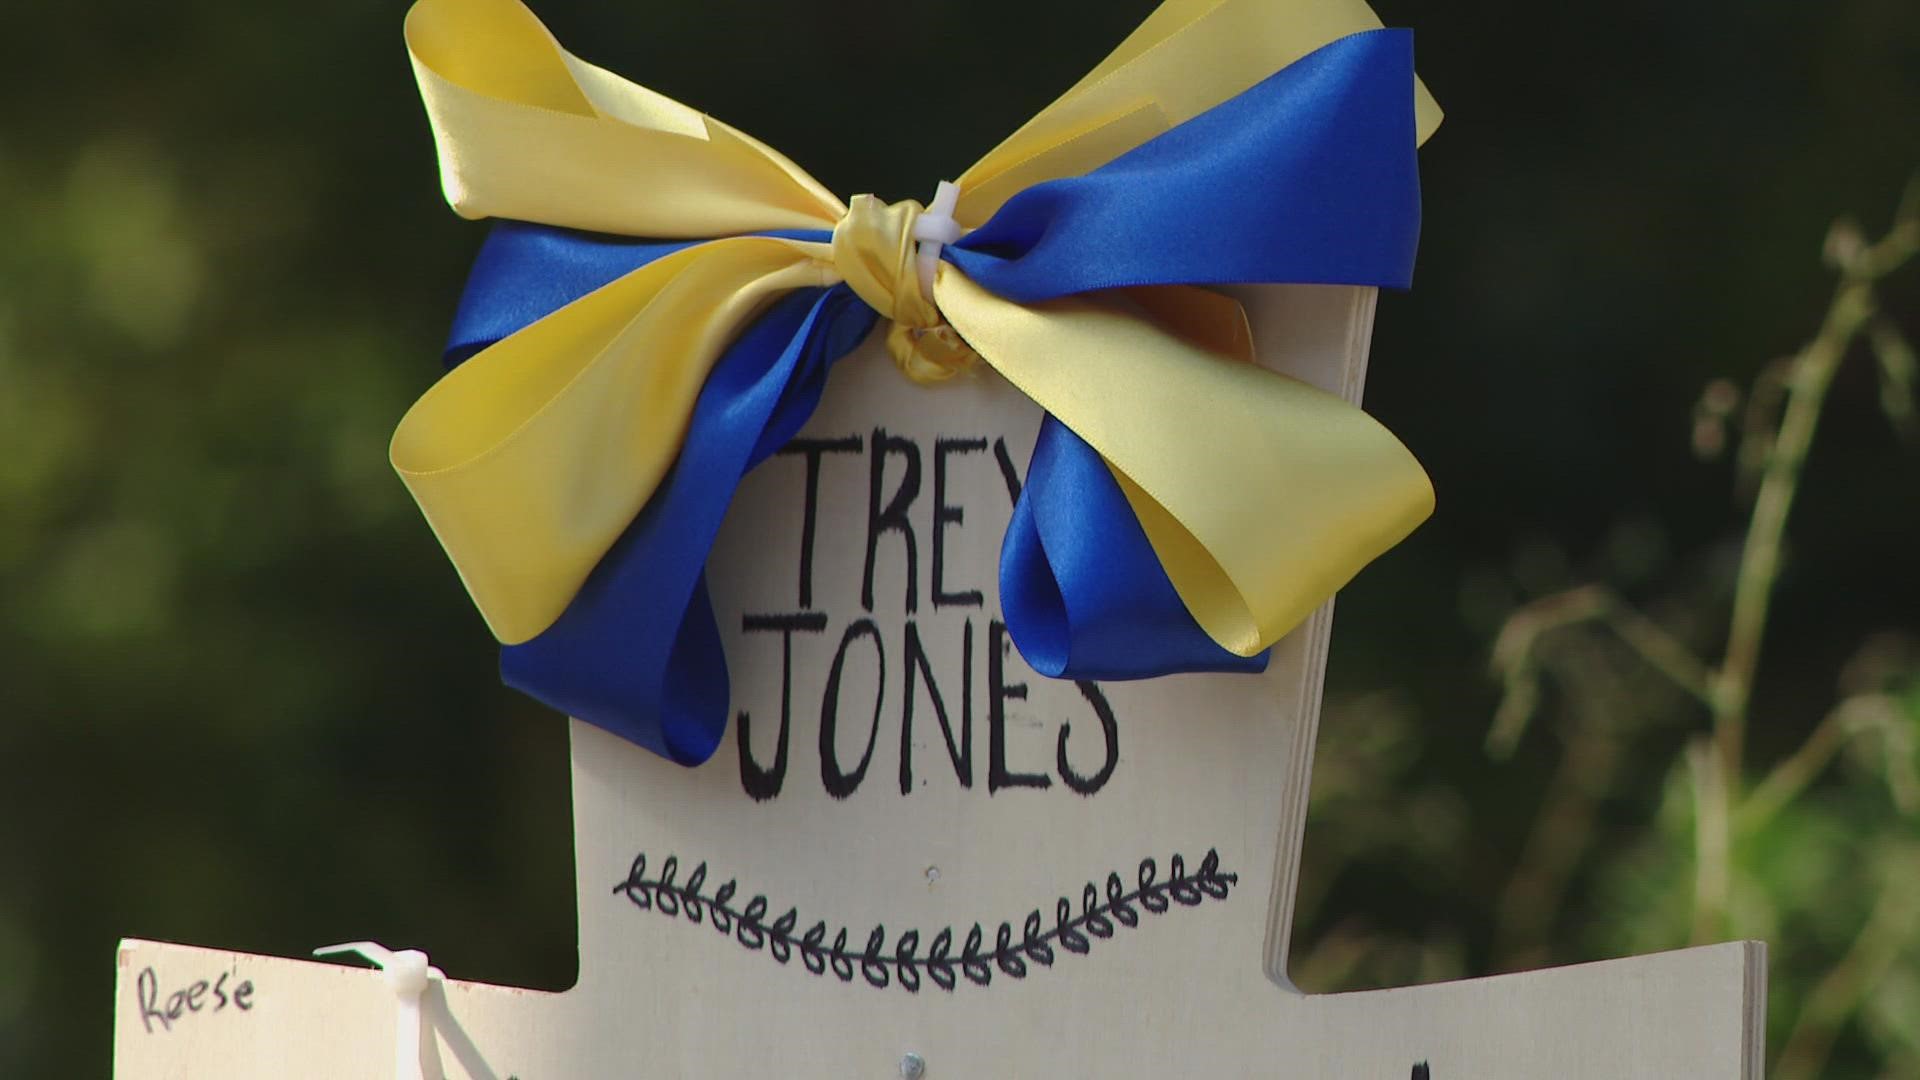 The memorial for Trey Jones was put up at 2nd and West Market Street days after he and his family were hit by a vehicle. Trey passed away July 7.